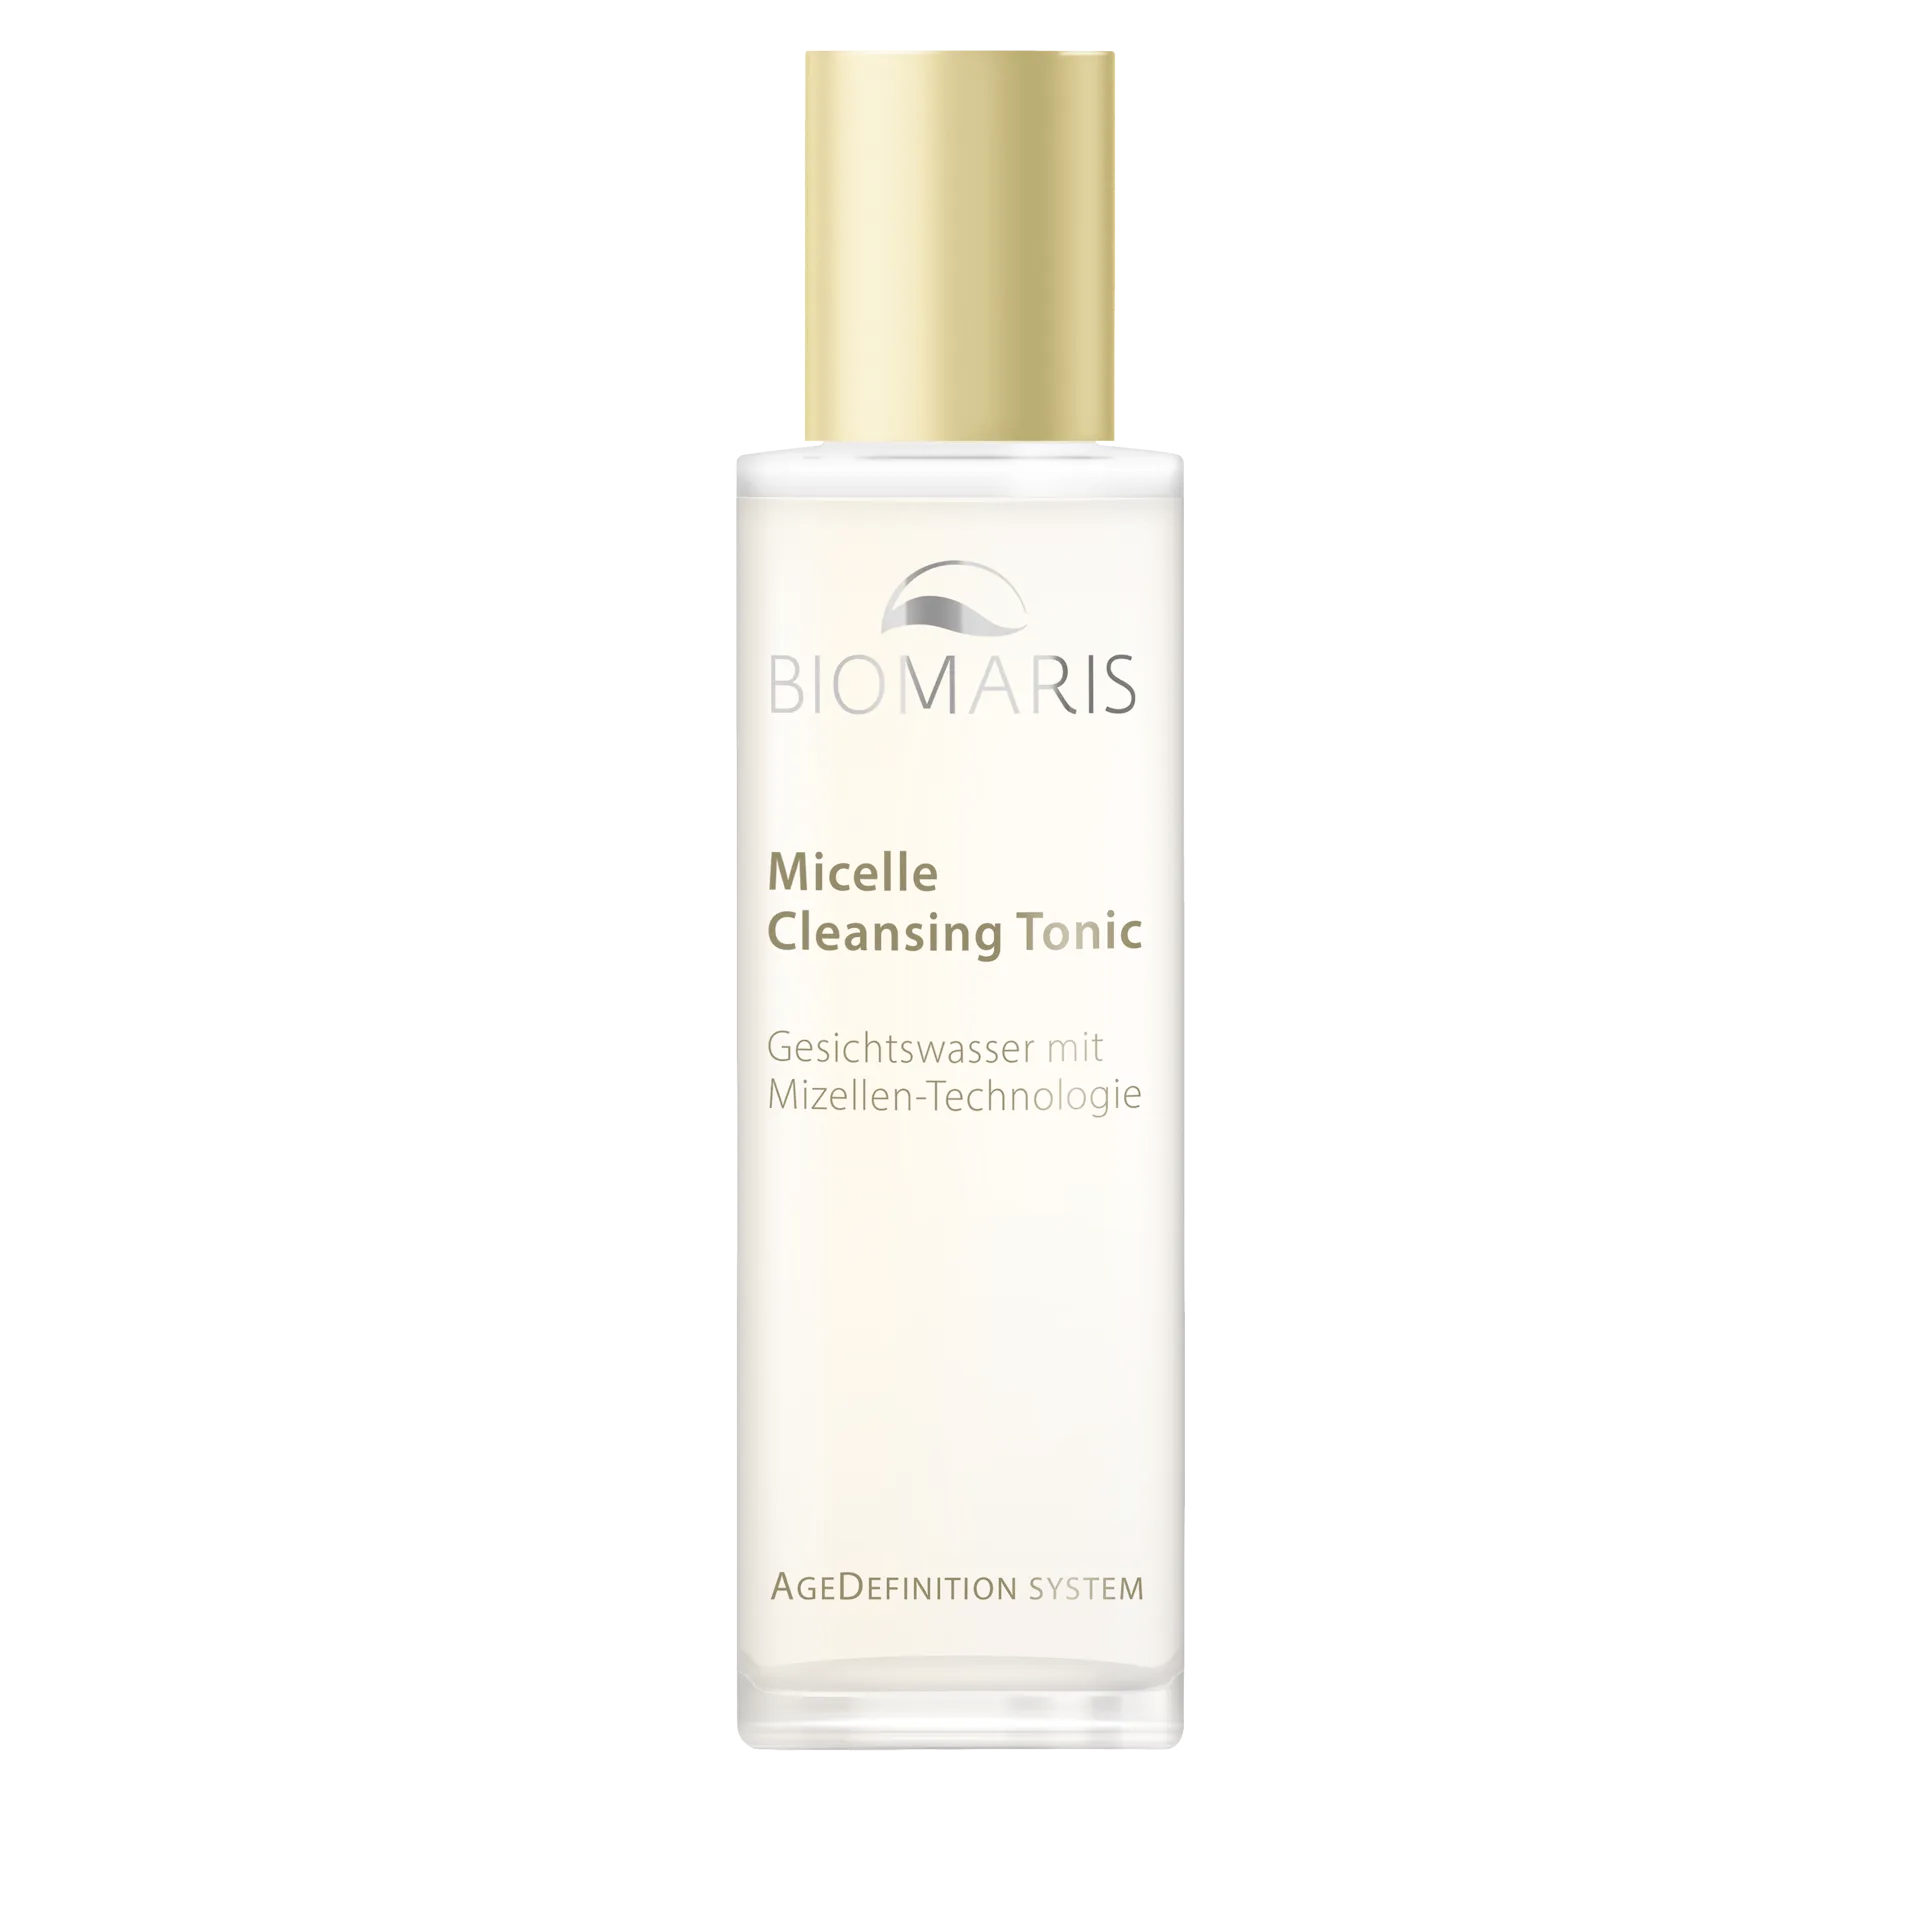 Micelle Cleansing Tonic